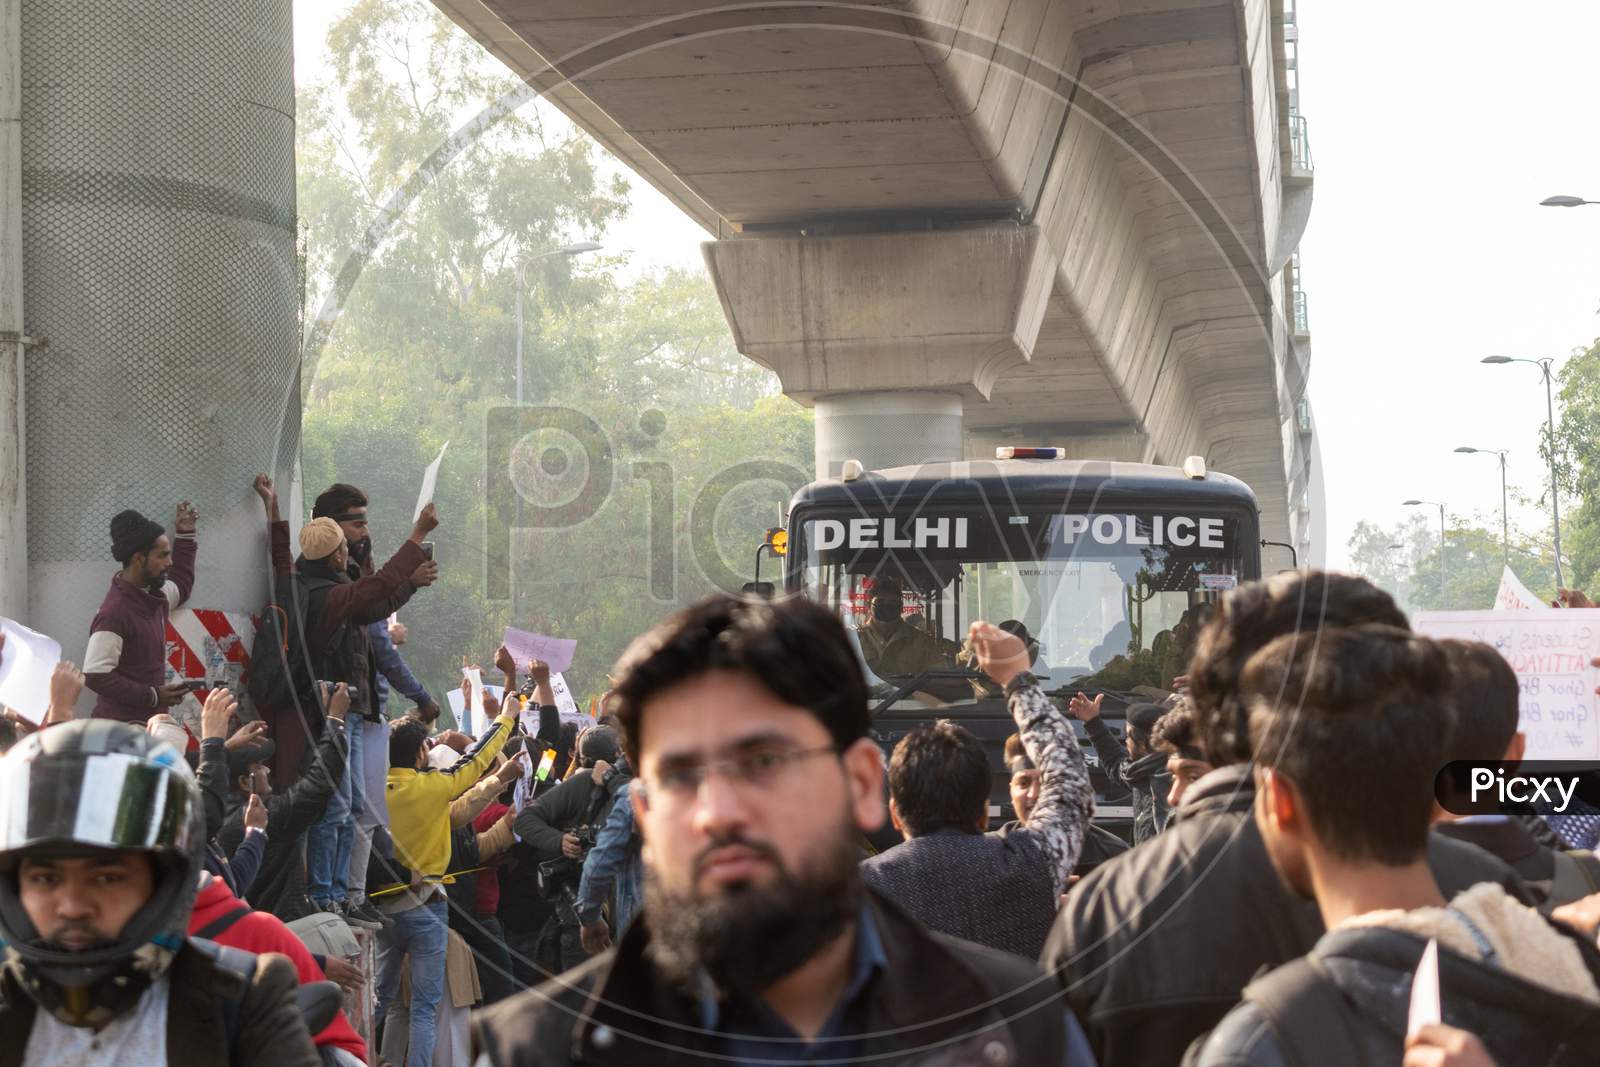 Delhi Police bus passing through the crowd during The Protest Against Caa And Nrc Outside Jamia Millia Islamia University